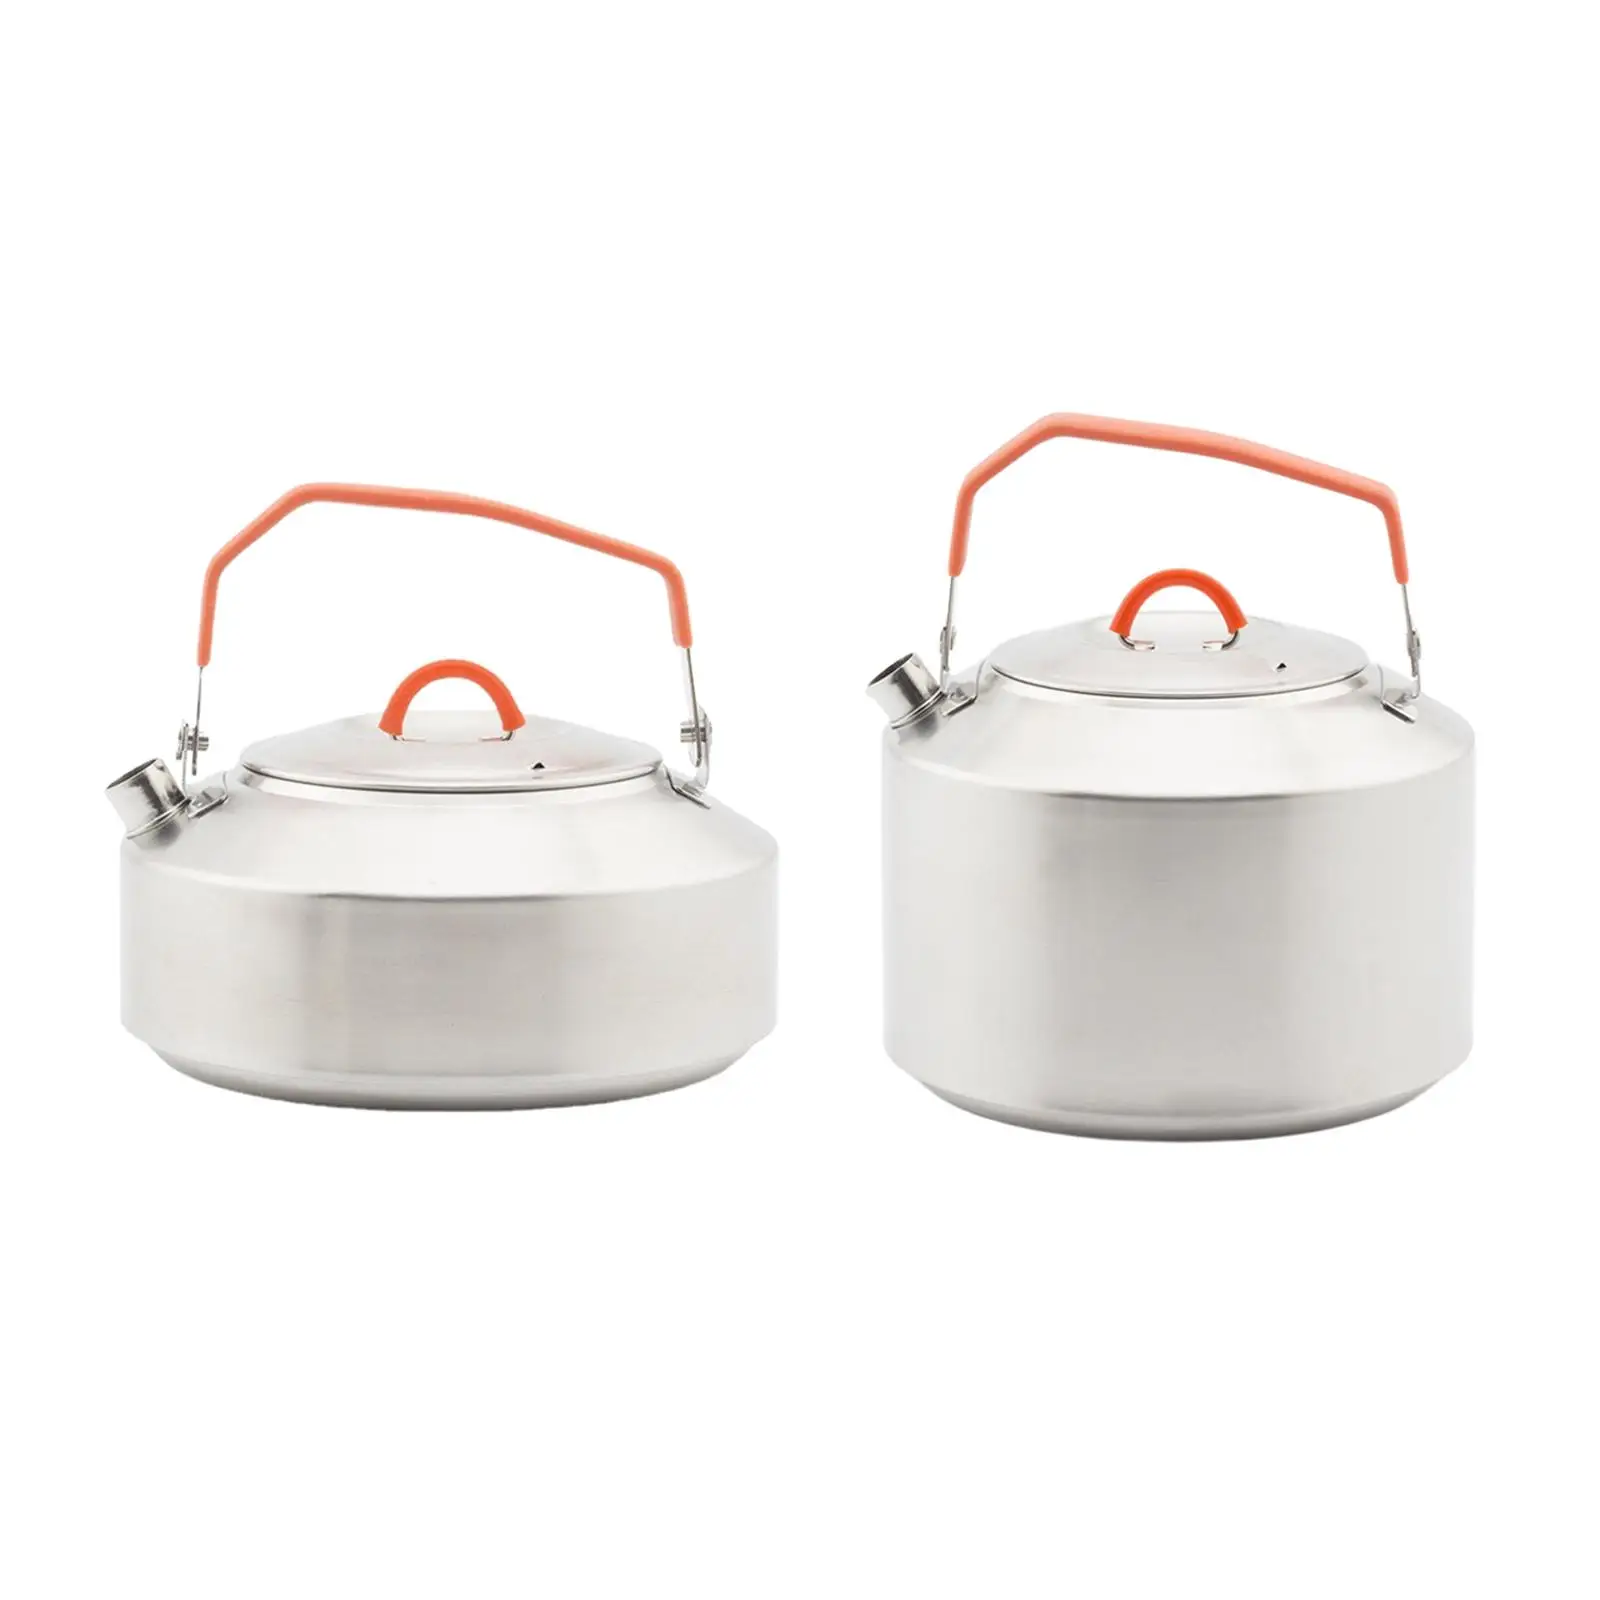 Portable Camping Kettle Camping Teapot for Outdoor Fishing Hiking Backpacking